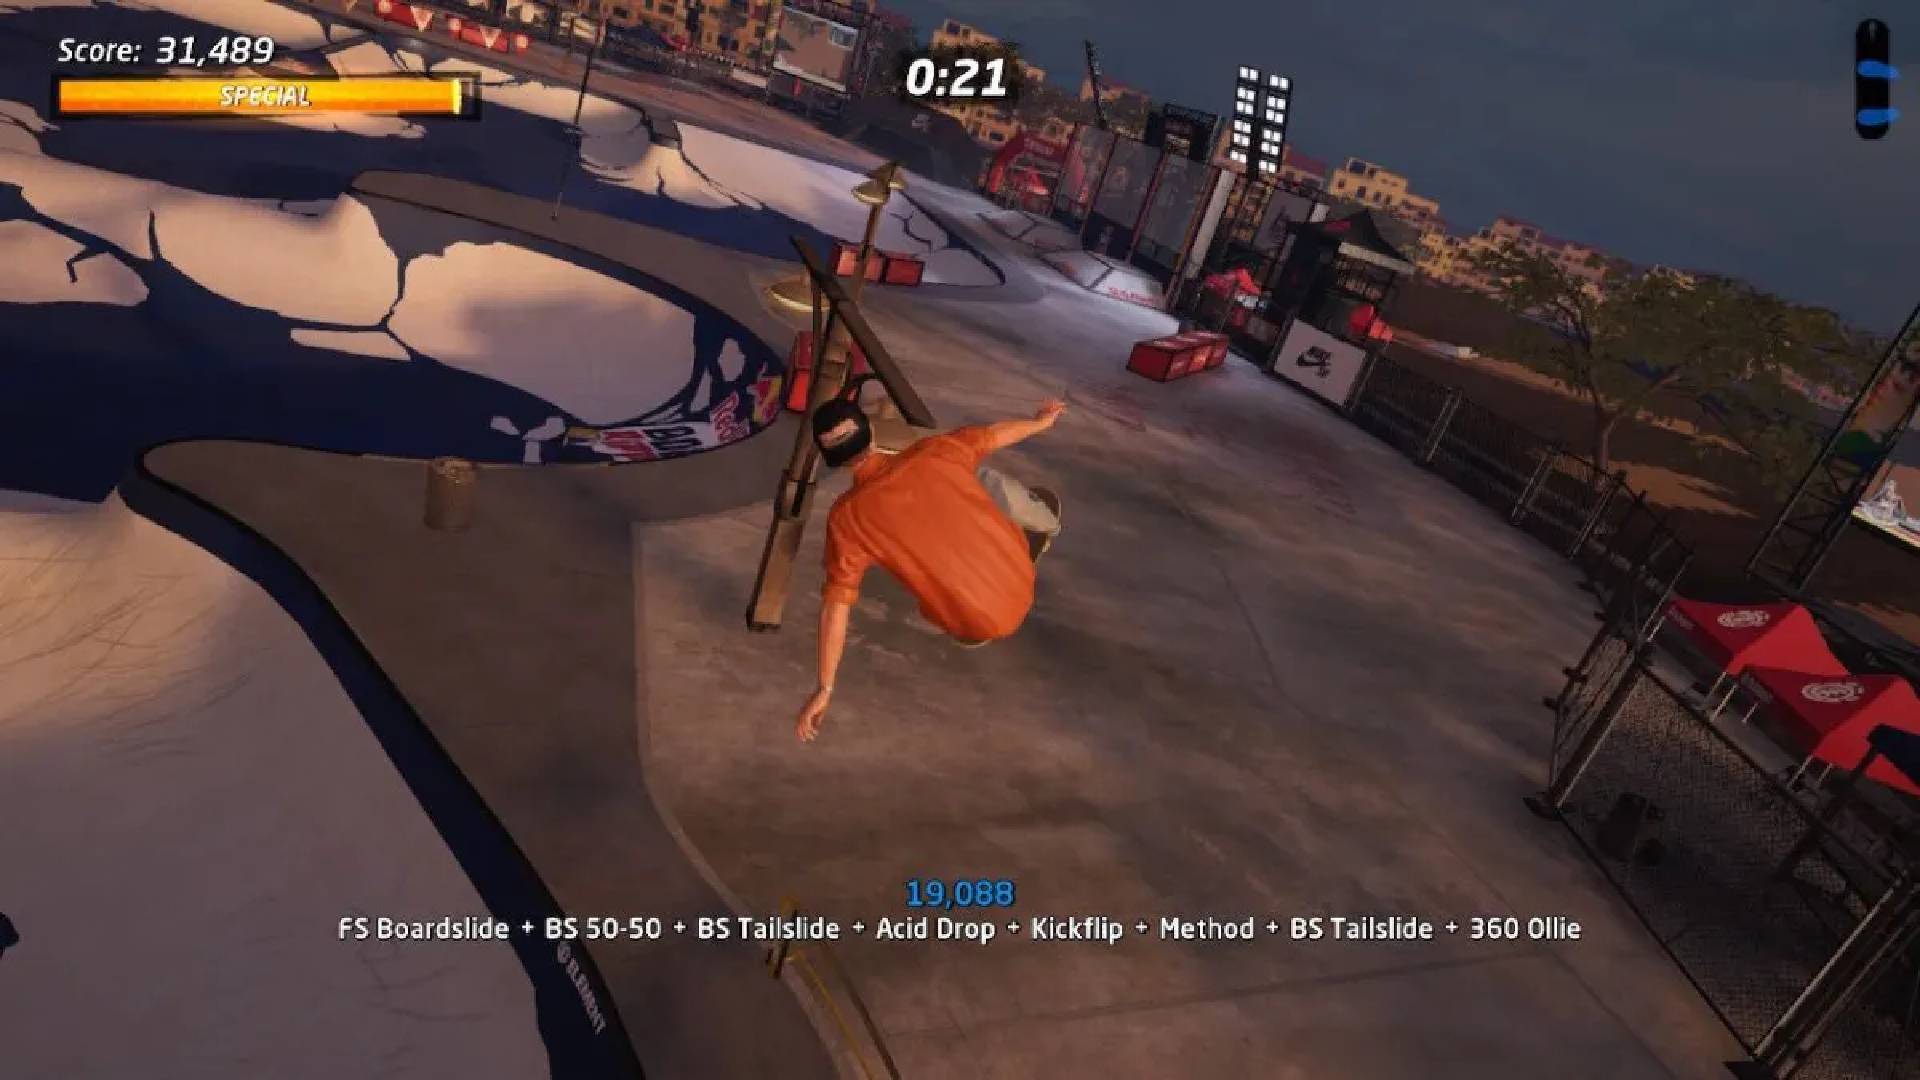 Best skateboarding games: A person in an orange shirt jumps out of a pool on a skatebaord